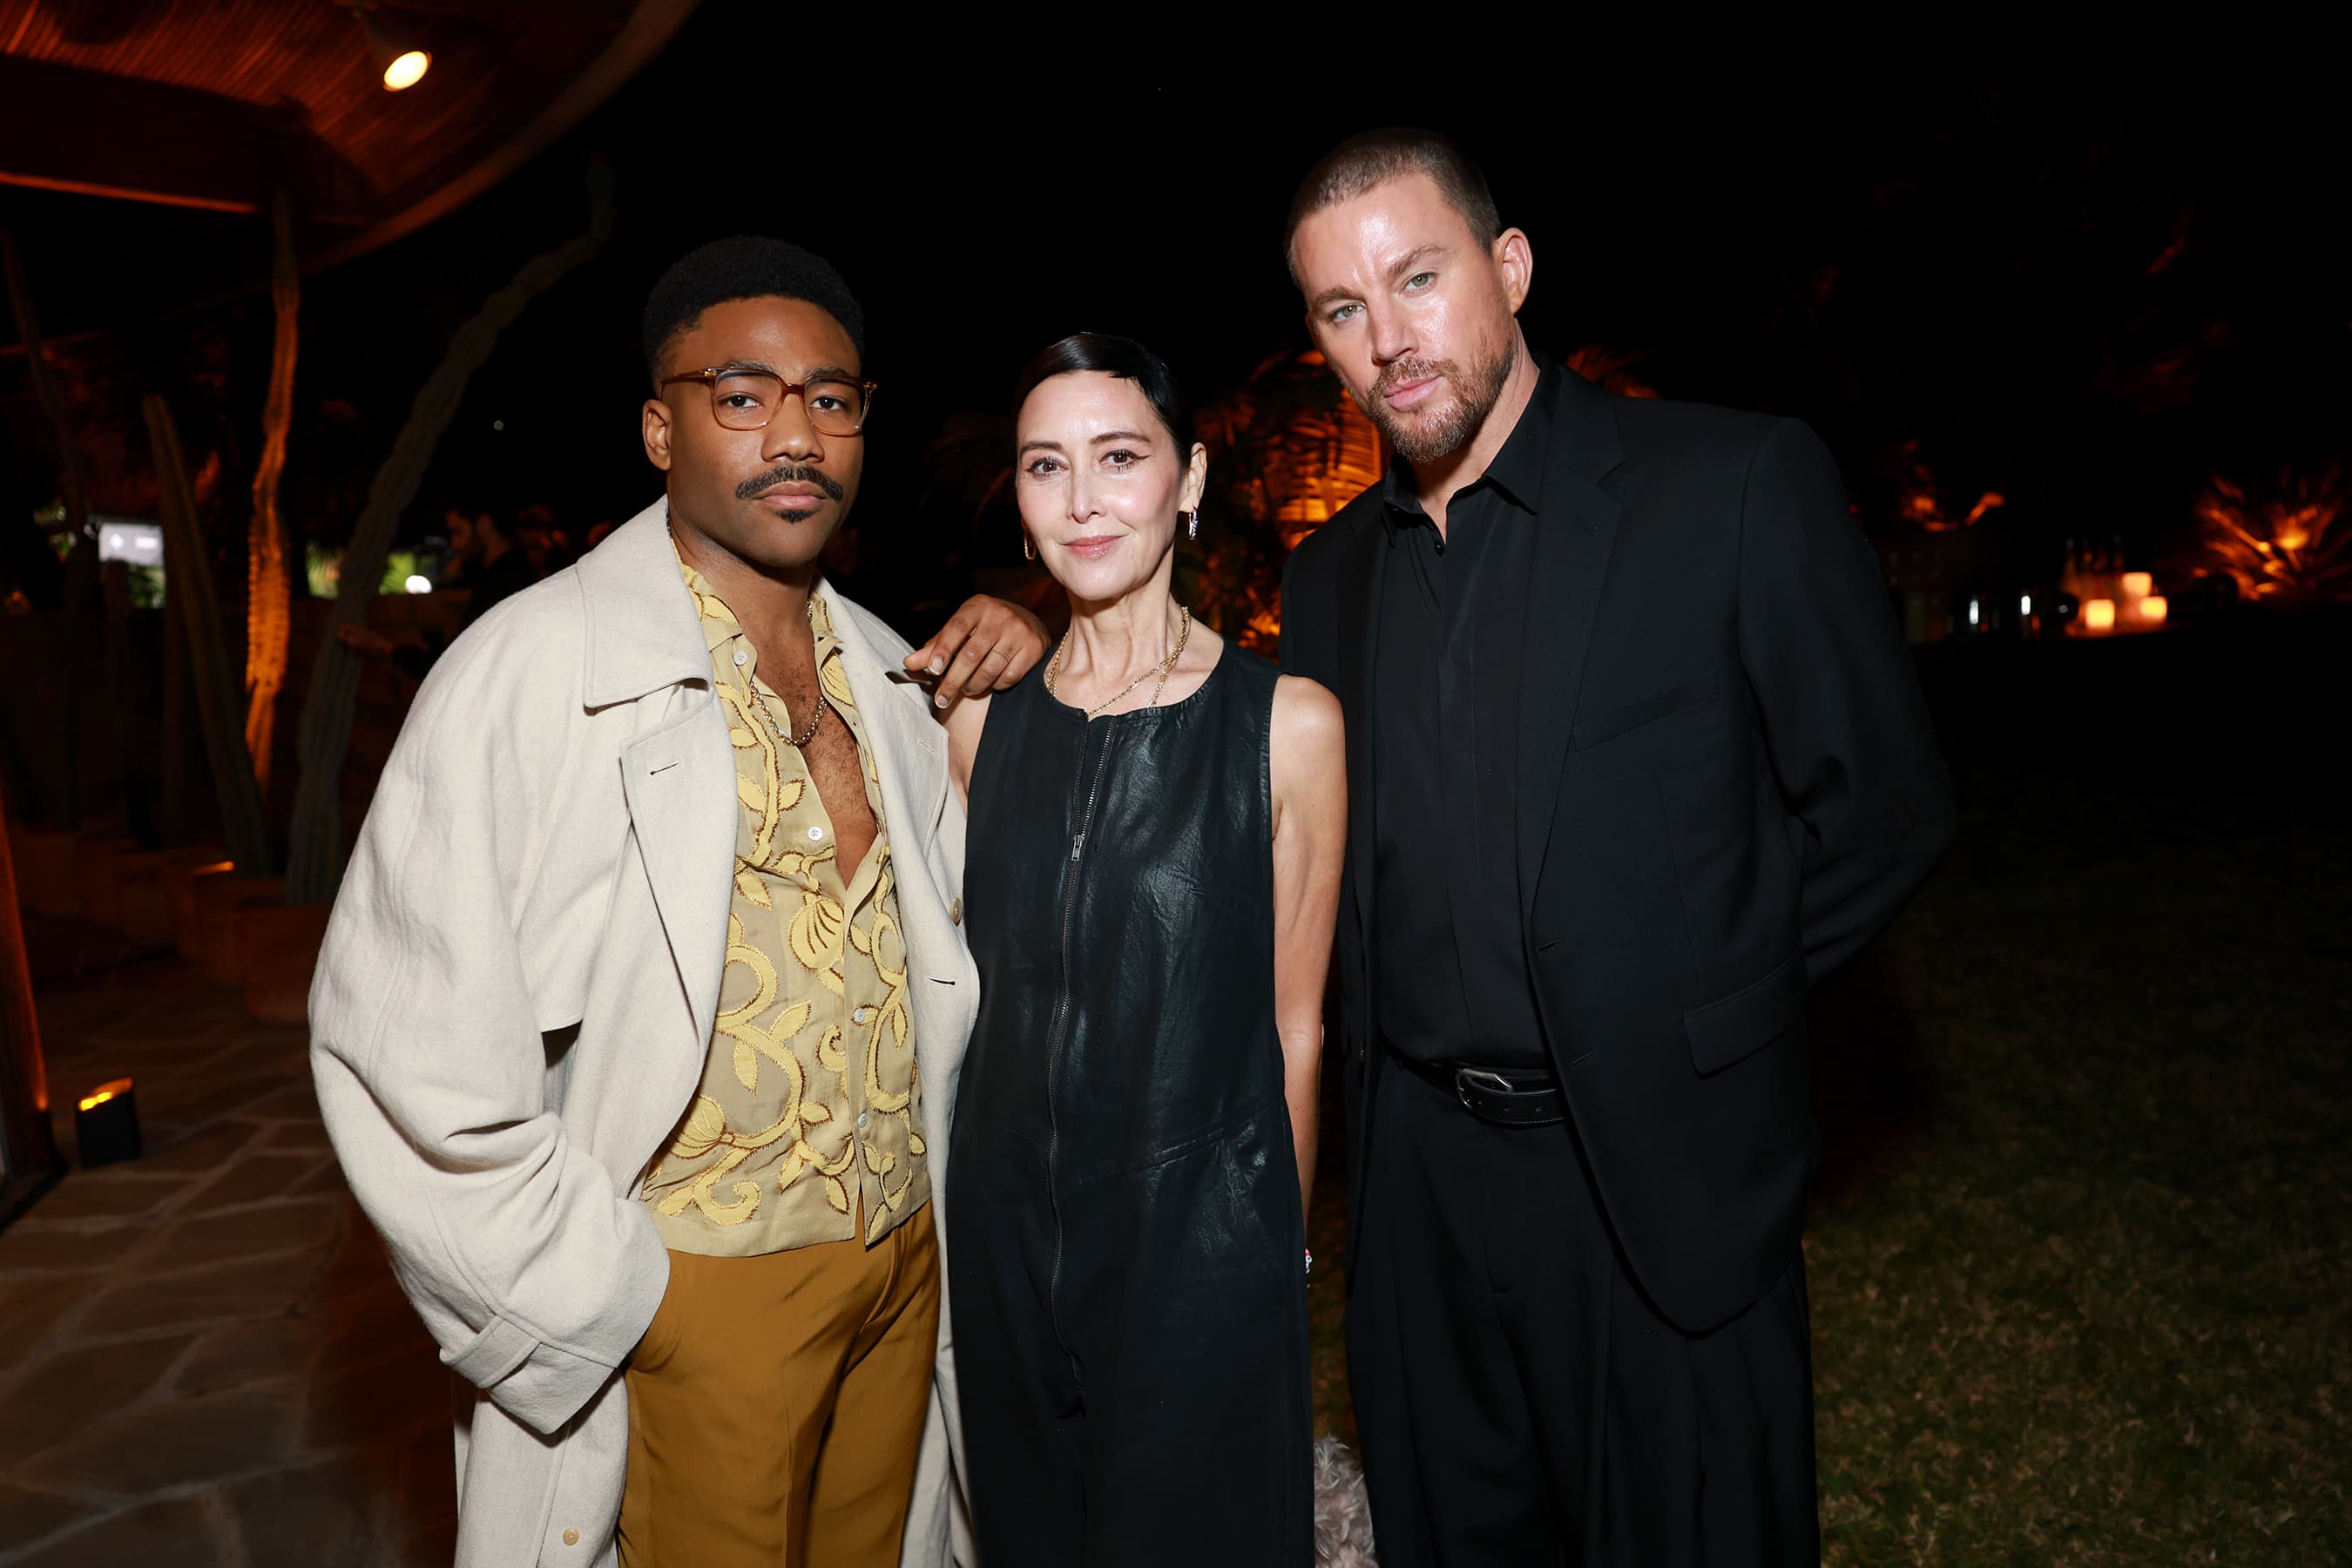 Saint Laurent x Vanity Fair x NBCUniversal party photo to celebrate Oppenheimer 